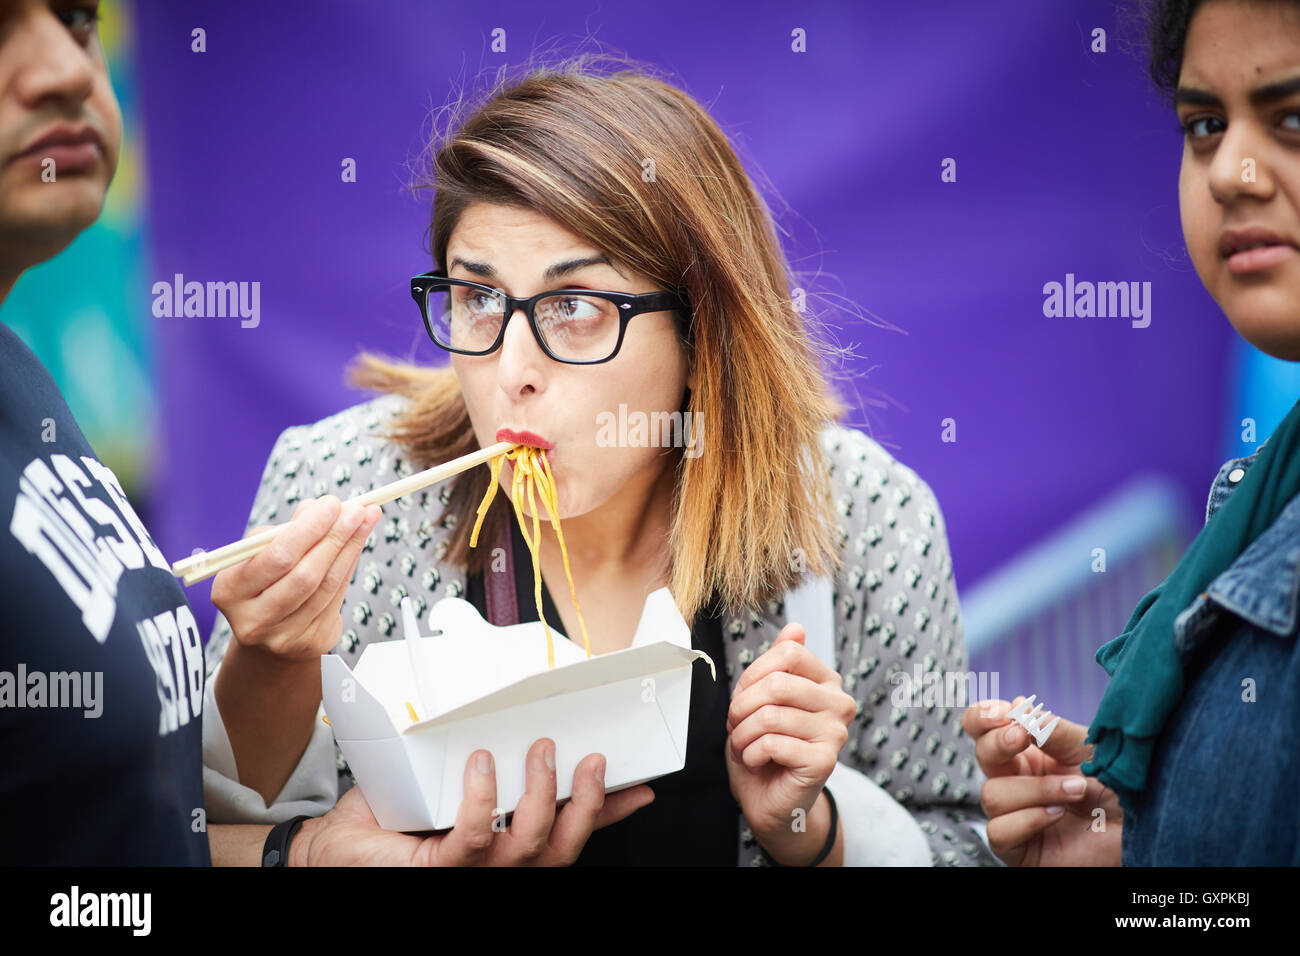 Bolton Food and Drink Festival  Eating noodles from box outside tale away chop sticks mouth full food carton box paper card card Stock Photo